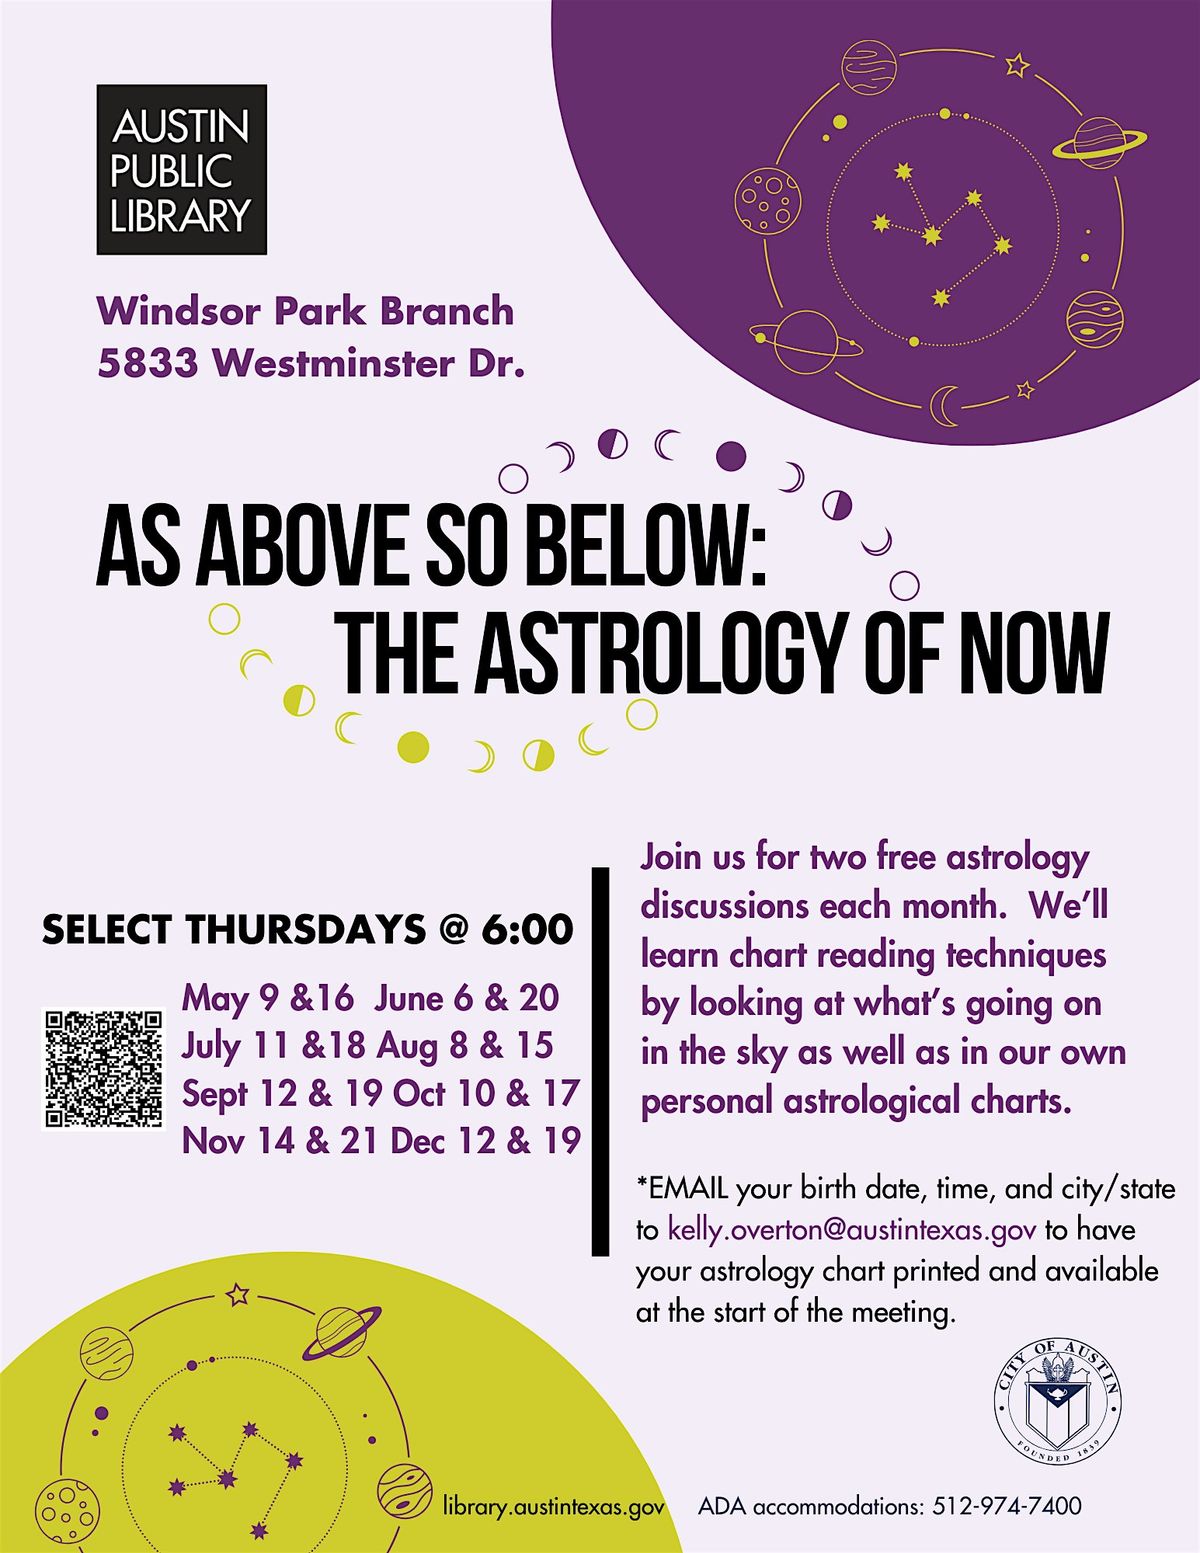 Astrology of Now: Free Astrology Discussion @ the Library